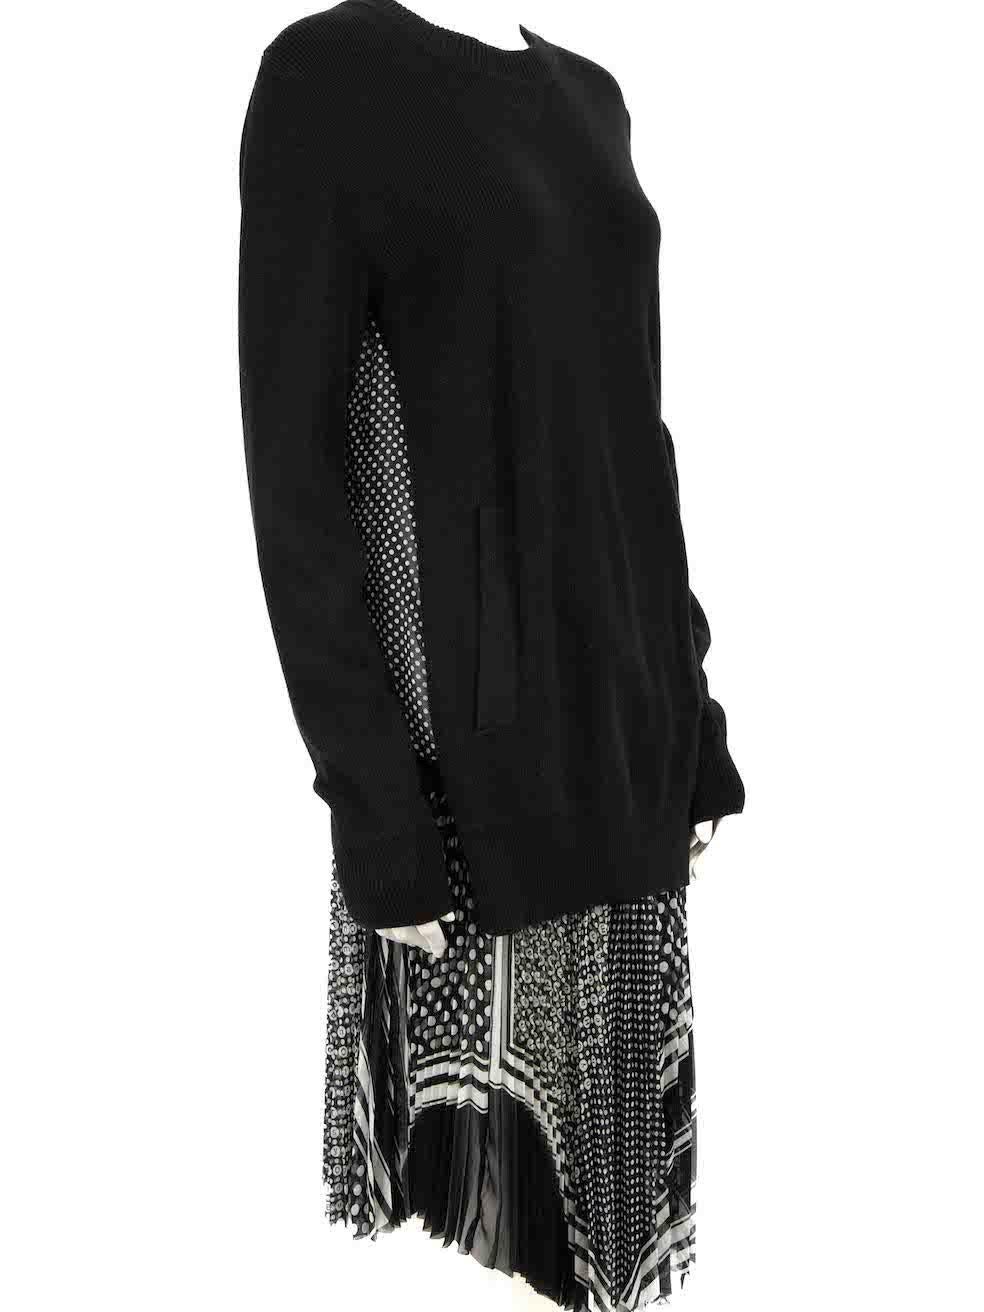 CONDITION is Very good. Hardly any visible wear to dress is evident on this used Sacai designer resale item.
 
 Details
 Black
 Cotton
 Knit dress
 Midi
 Back printed panelled detail
 Long sleeves
 Round neck
 Pleated hem
 2x Side pockets
 
 
 Made